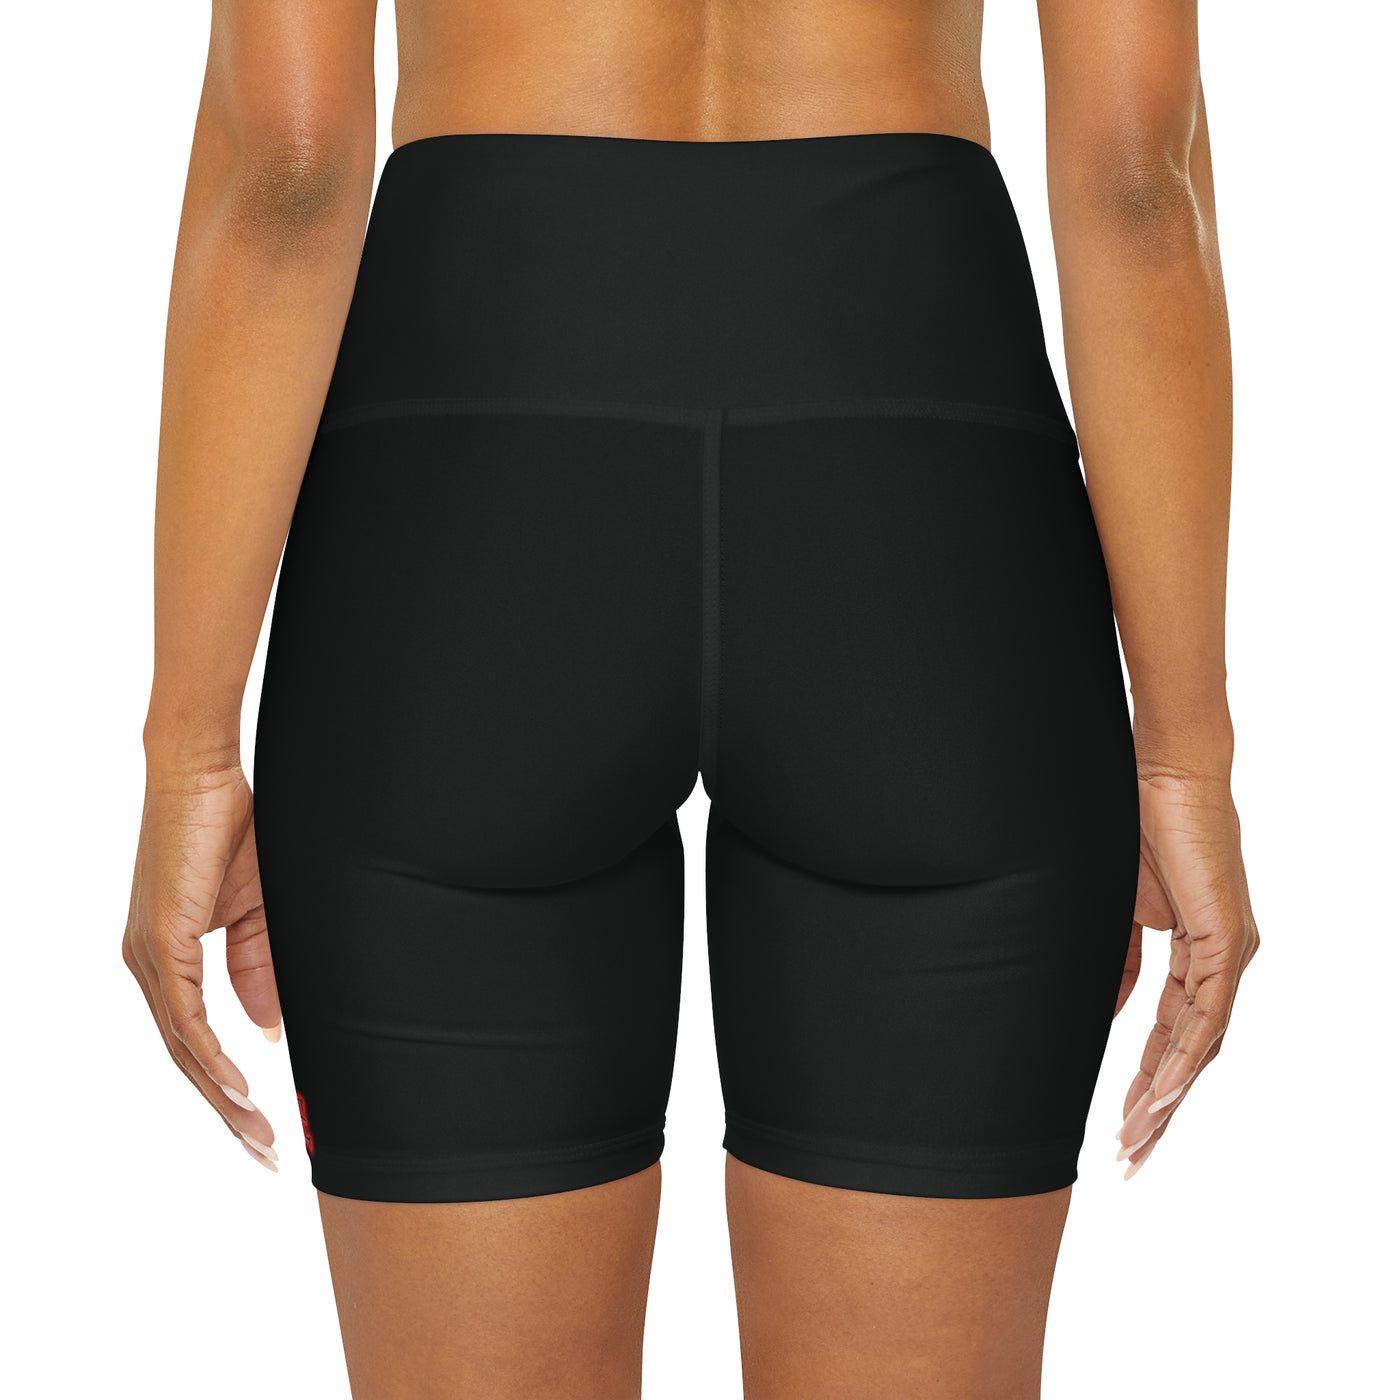  High Waisted Yoga Shorts (AOP) - All-over printed high-rise shorts designed for yoga practice, providing flexibility and comfort during workouts and active sessions.